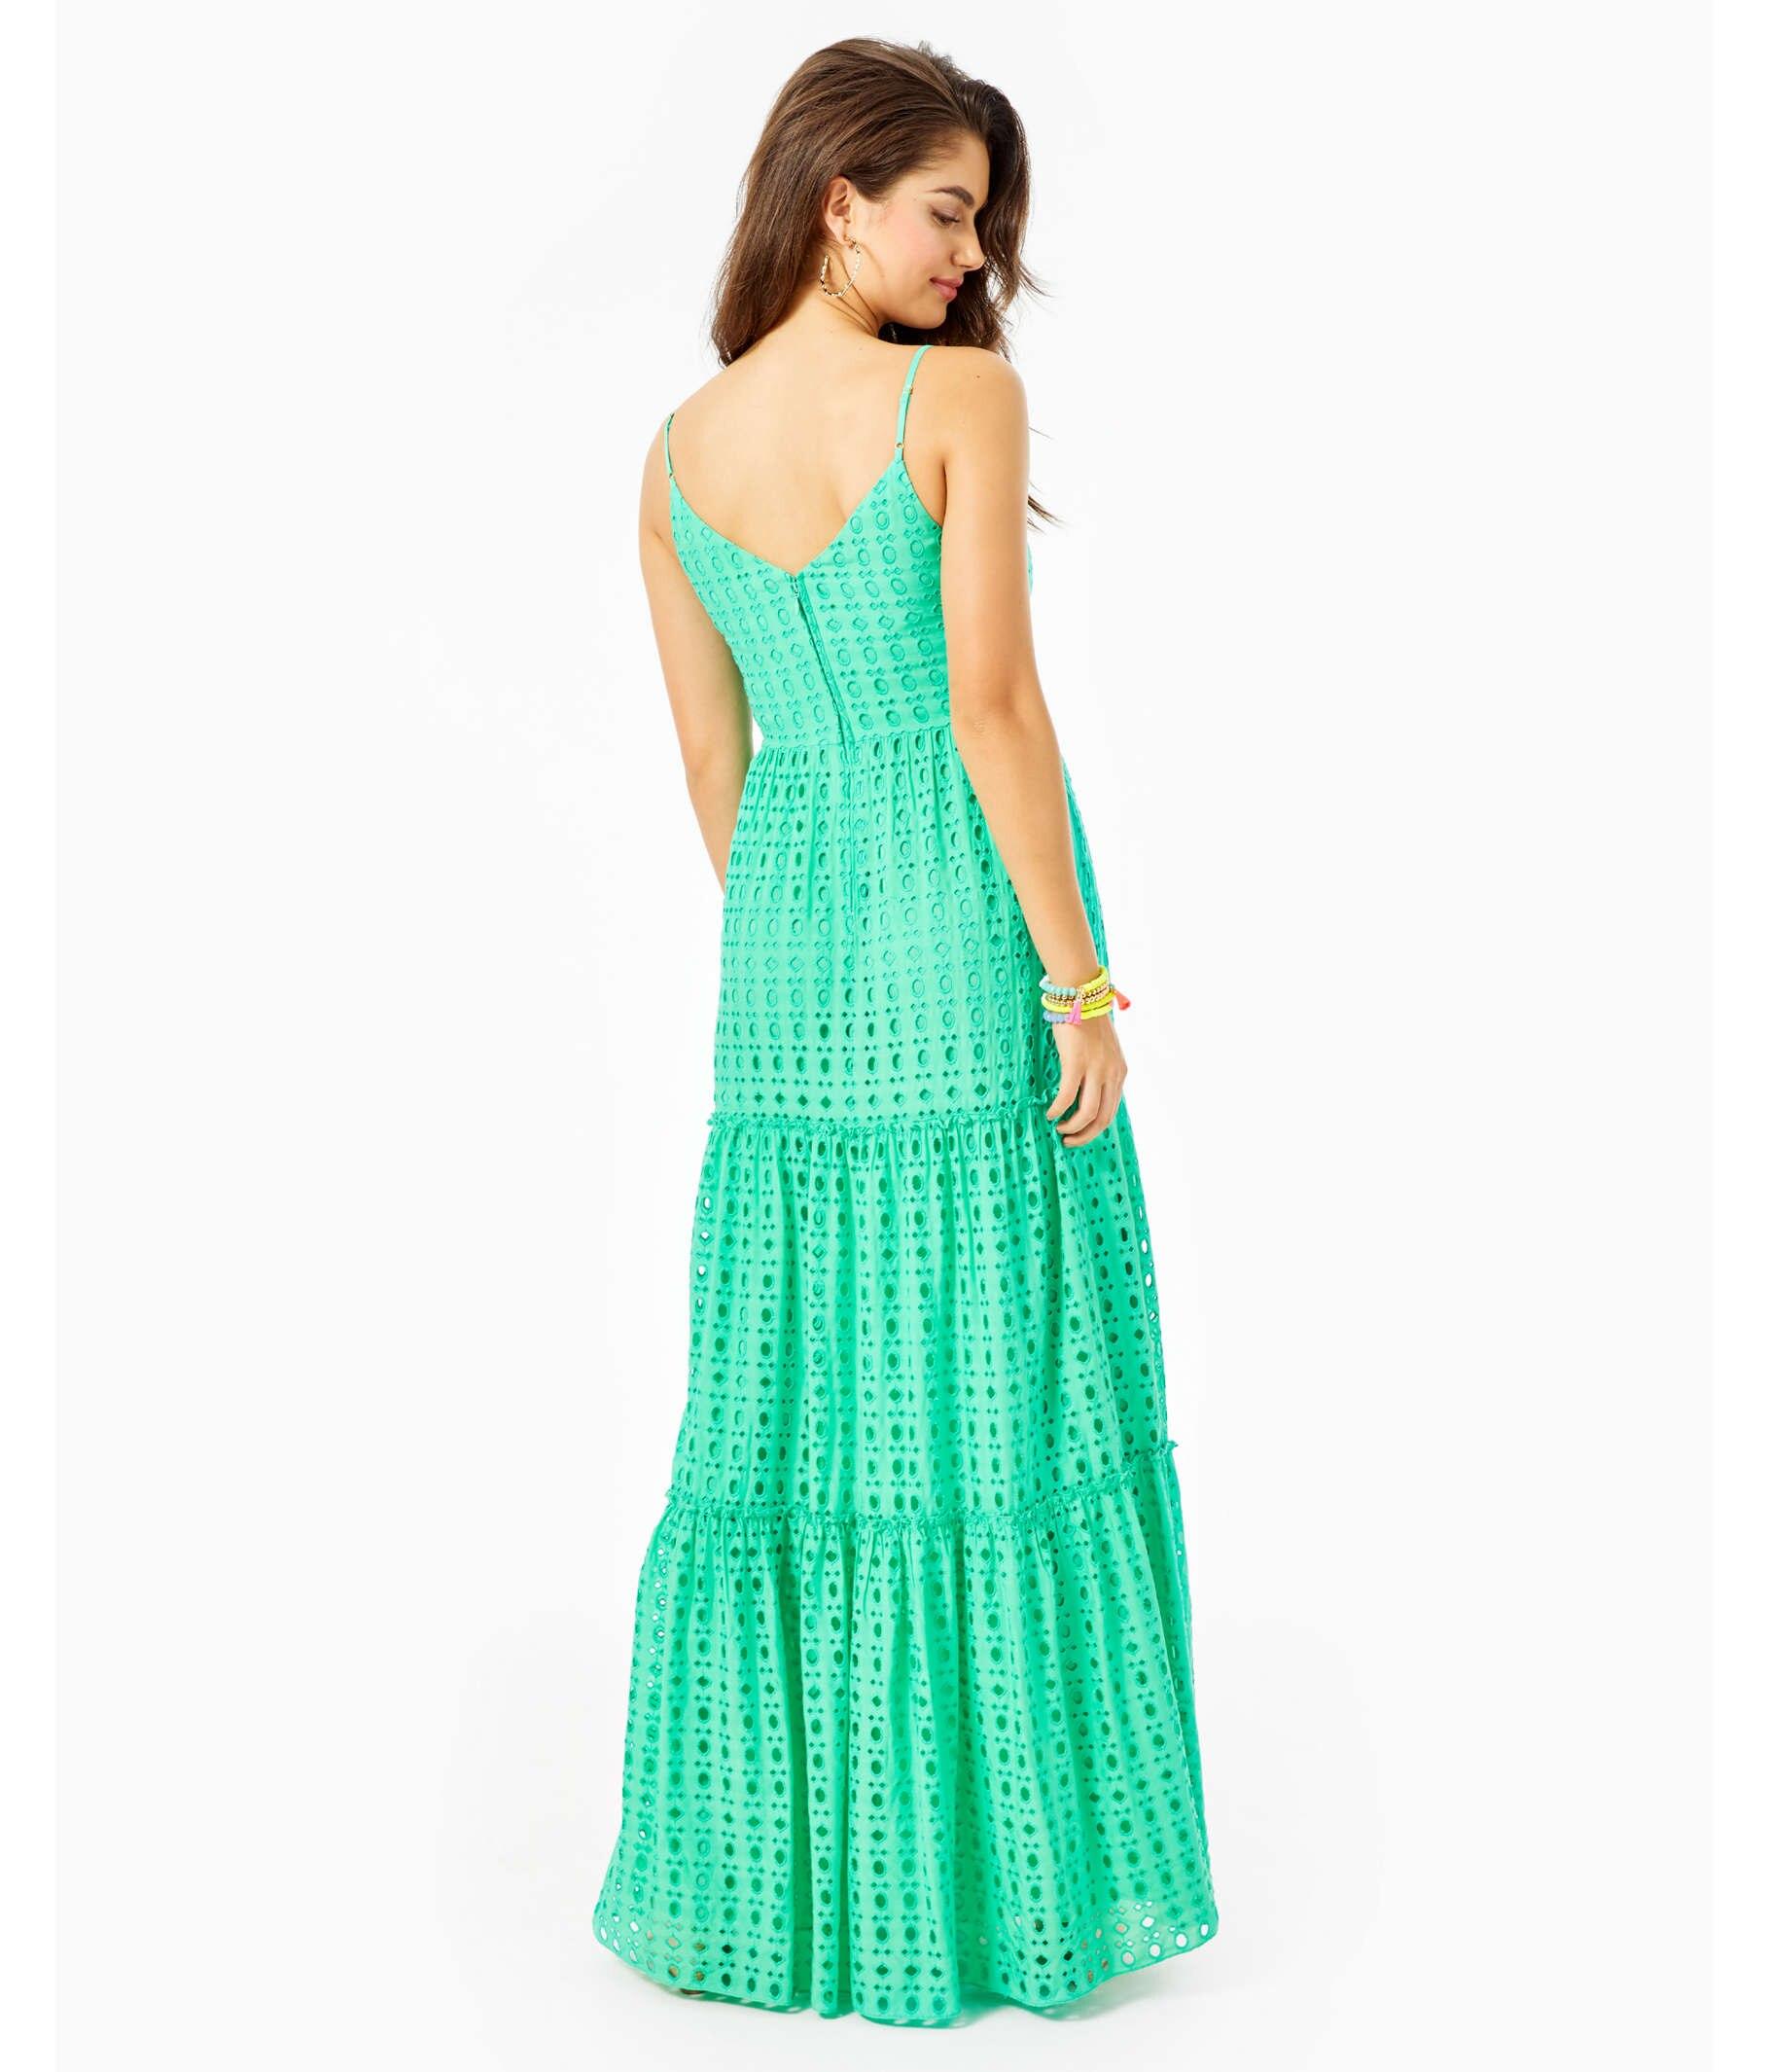 Lilly Pulitzer Melody Maxi Dress in Green - Lyst